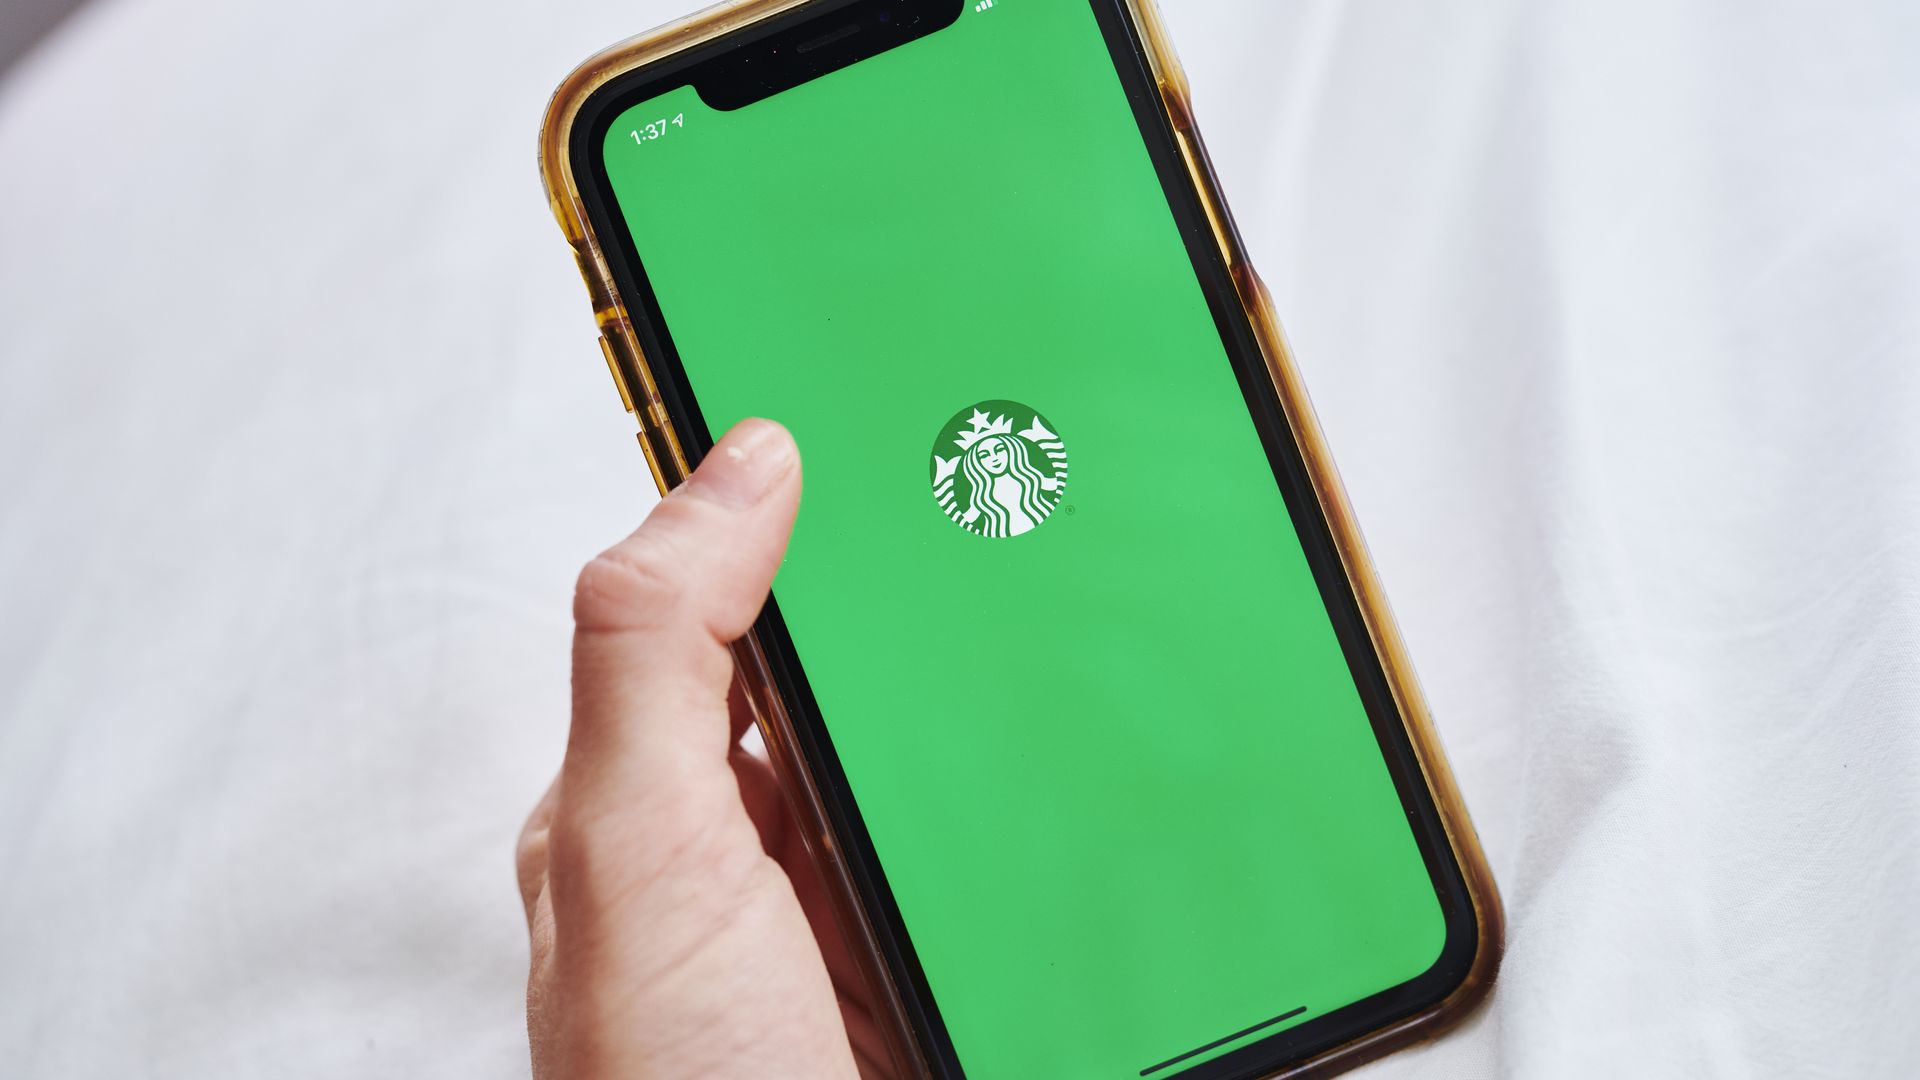 Hand holding phone with green screen and Starbucks siren logo